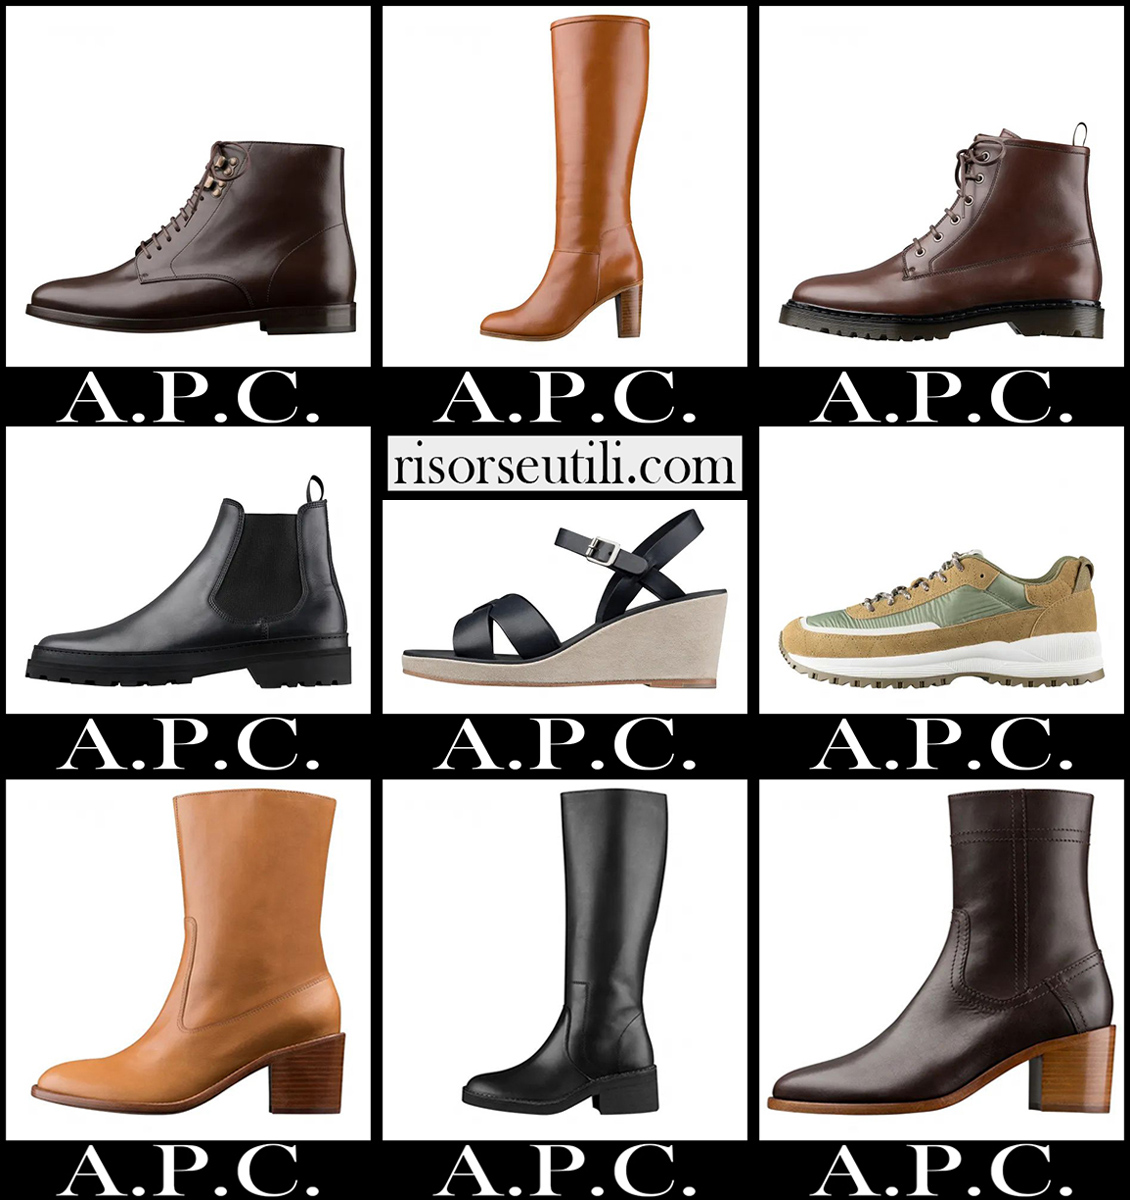 New arrivals A.P.C. shoes 2021 womens footwear